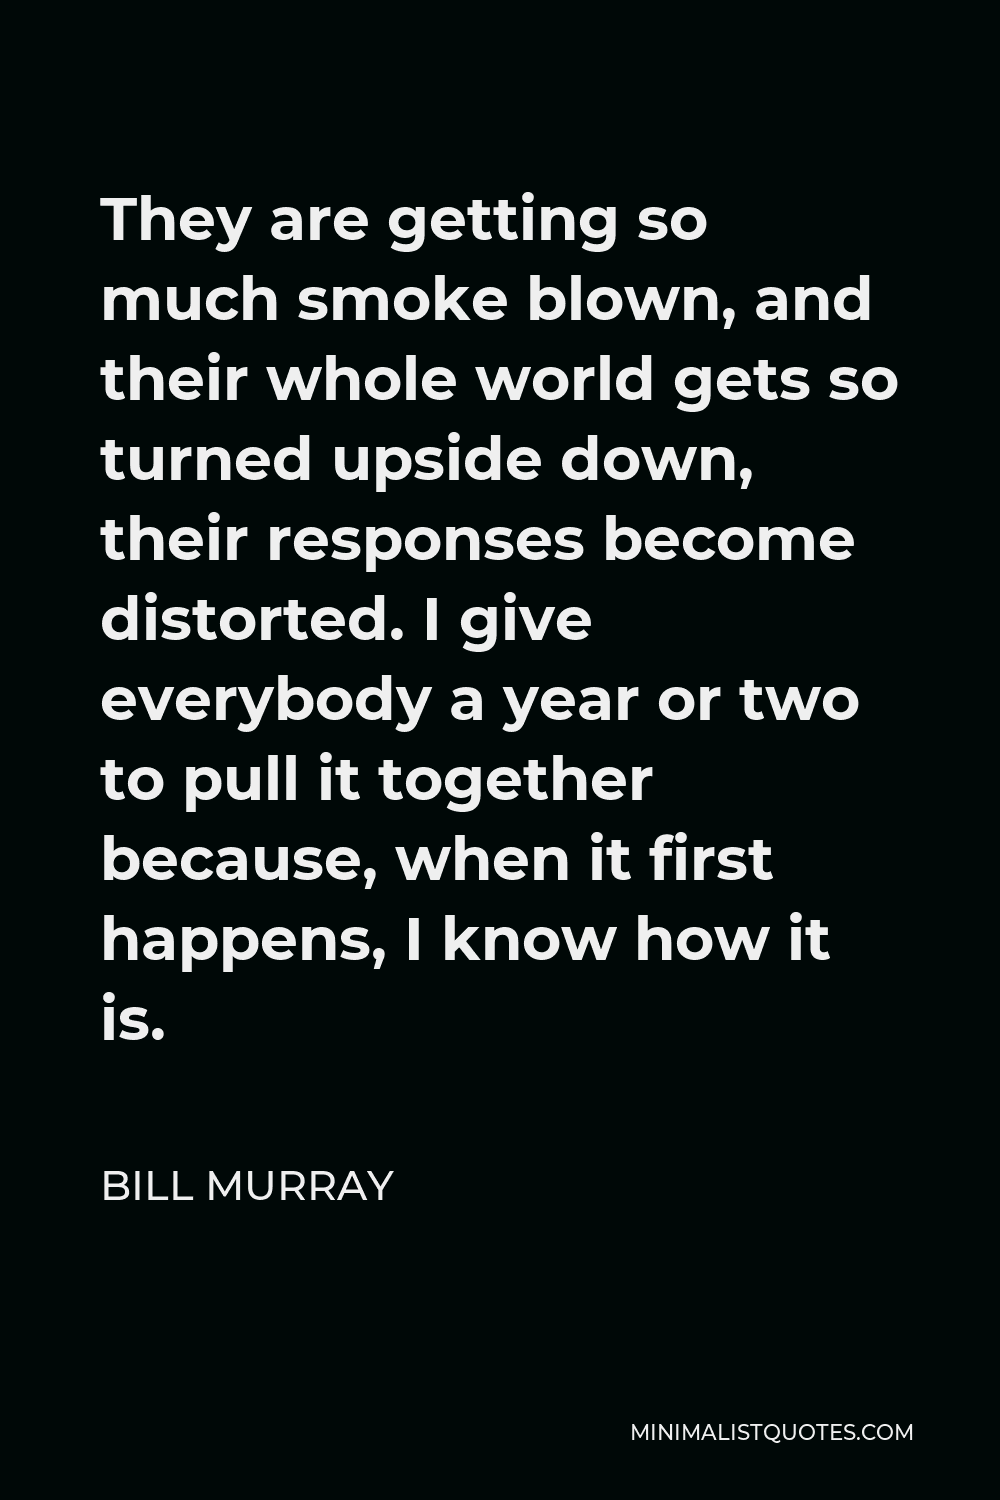 Bill Murray Quote - They are getting so much smoke blown, and their whole world gets so turned upside down, their responses become distorted. I give everybody a year or two to pull it together because, when it first happens, I know how it is.